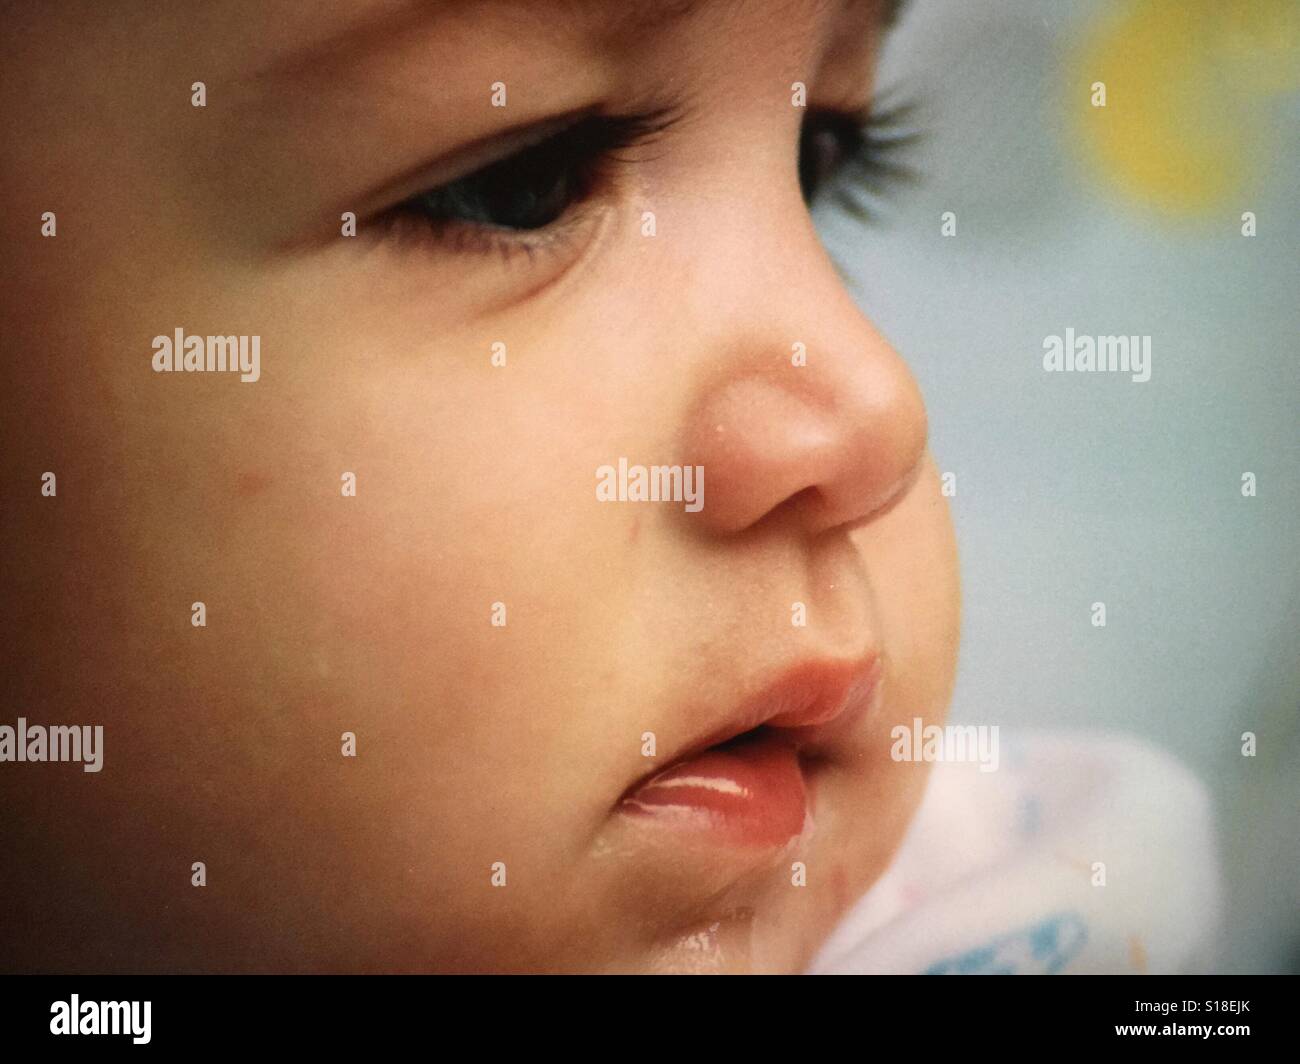 A close up image of a baby girl's face Stock Photo